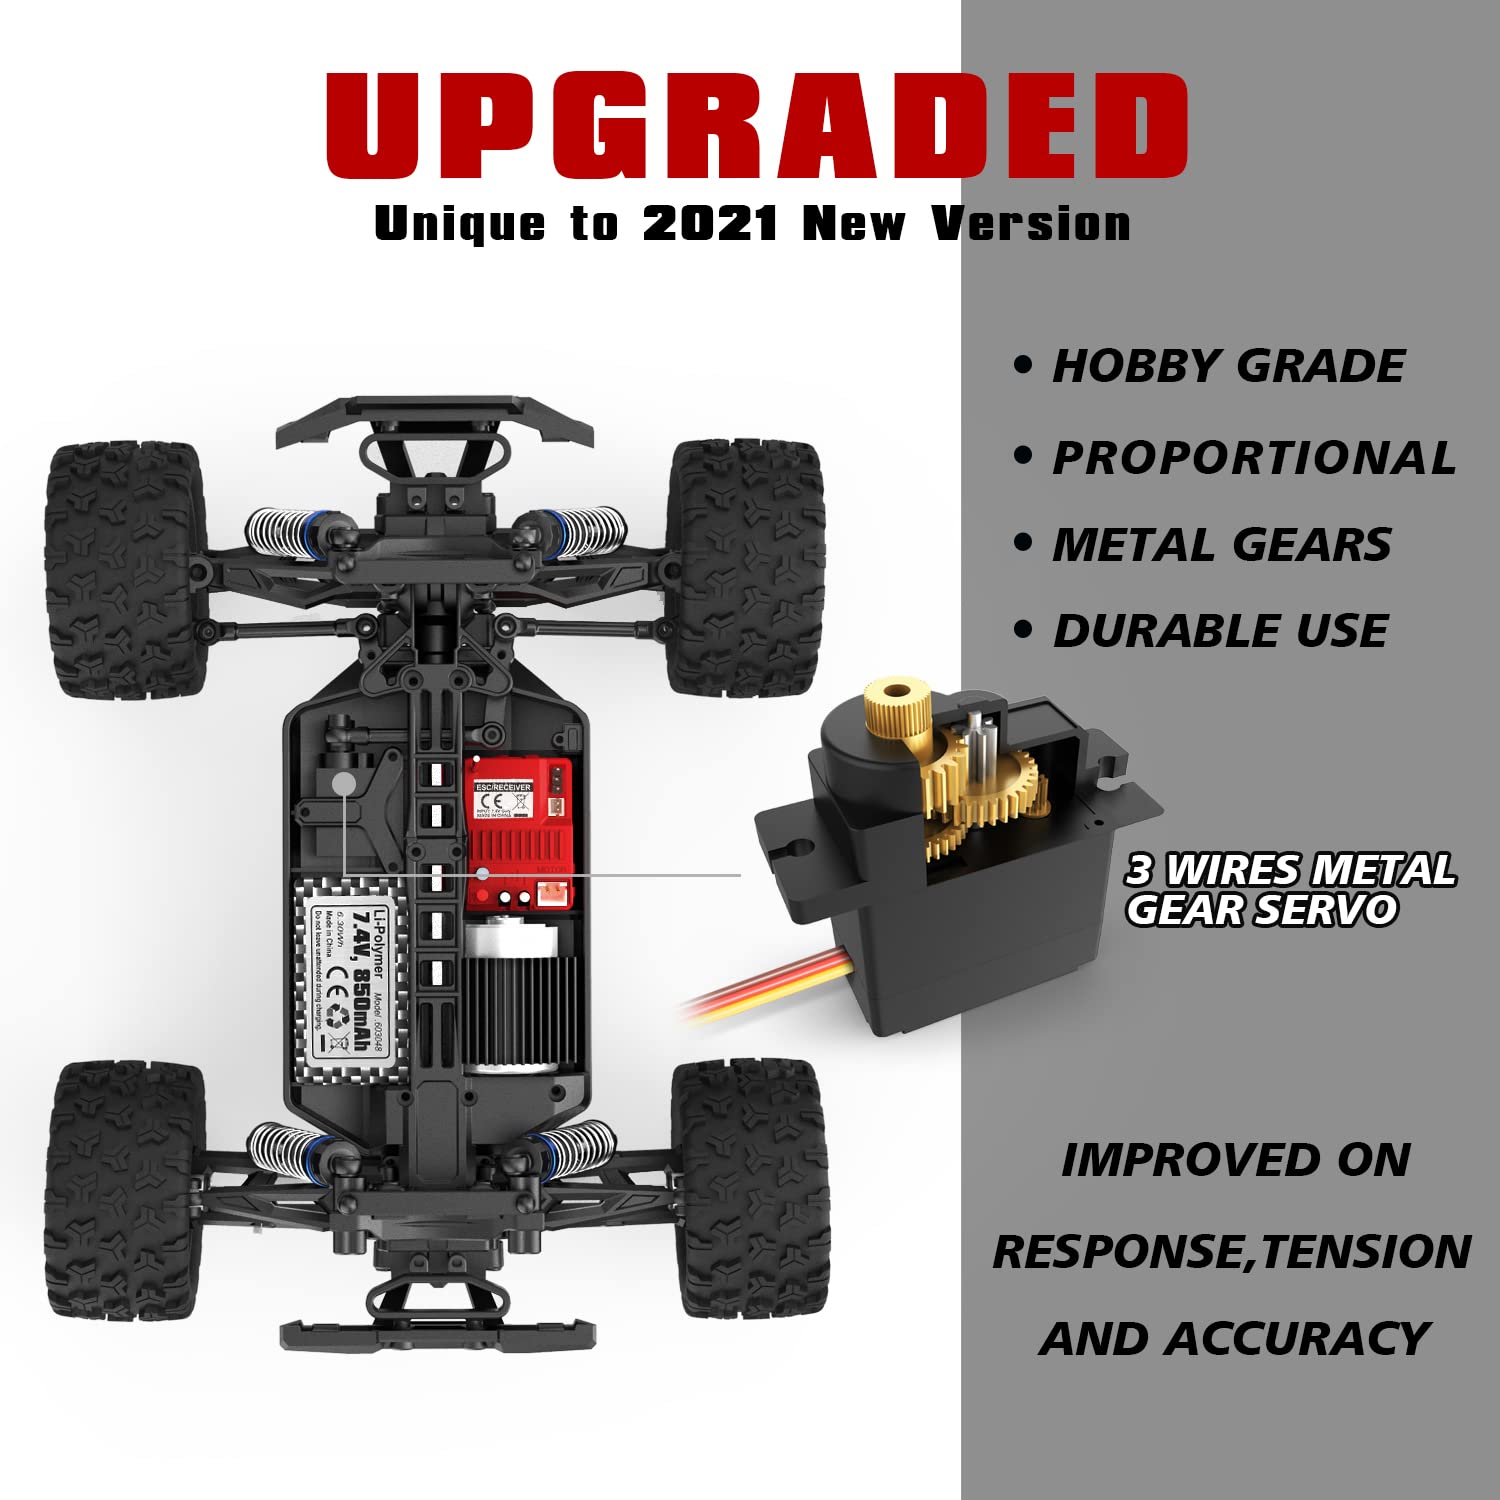 1:18 Scale RC Monster Truck 18859E 36km/h Speed 4X4 Off Road Remote Control Truck,Waterproof Electric Powered RC Cars All Terrain Toys Vehicles with 2 Batteries,Excellent Xmas Gifts for kid and Adults